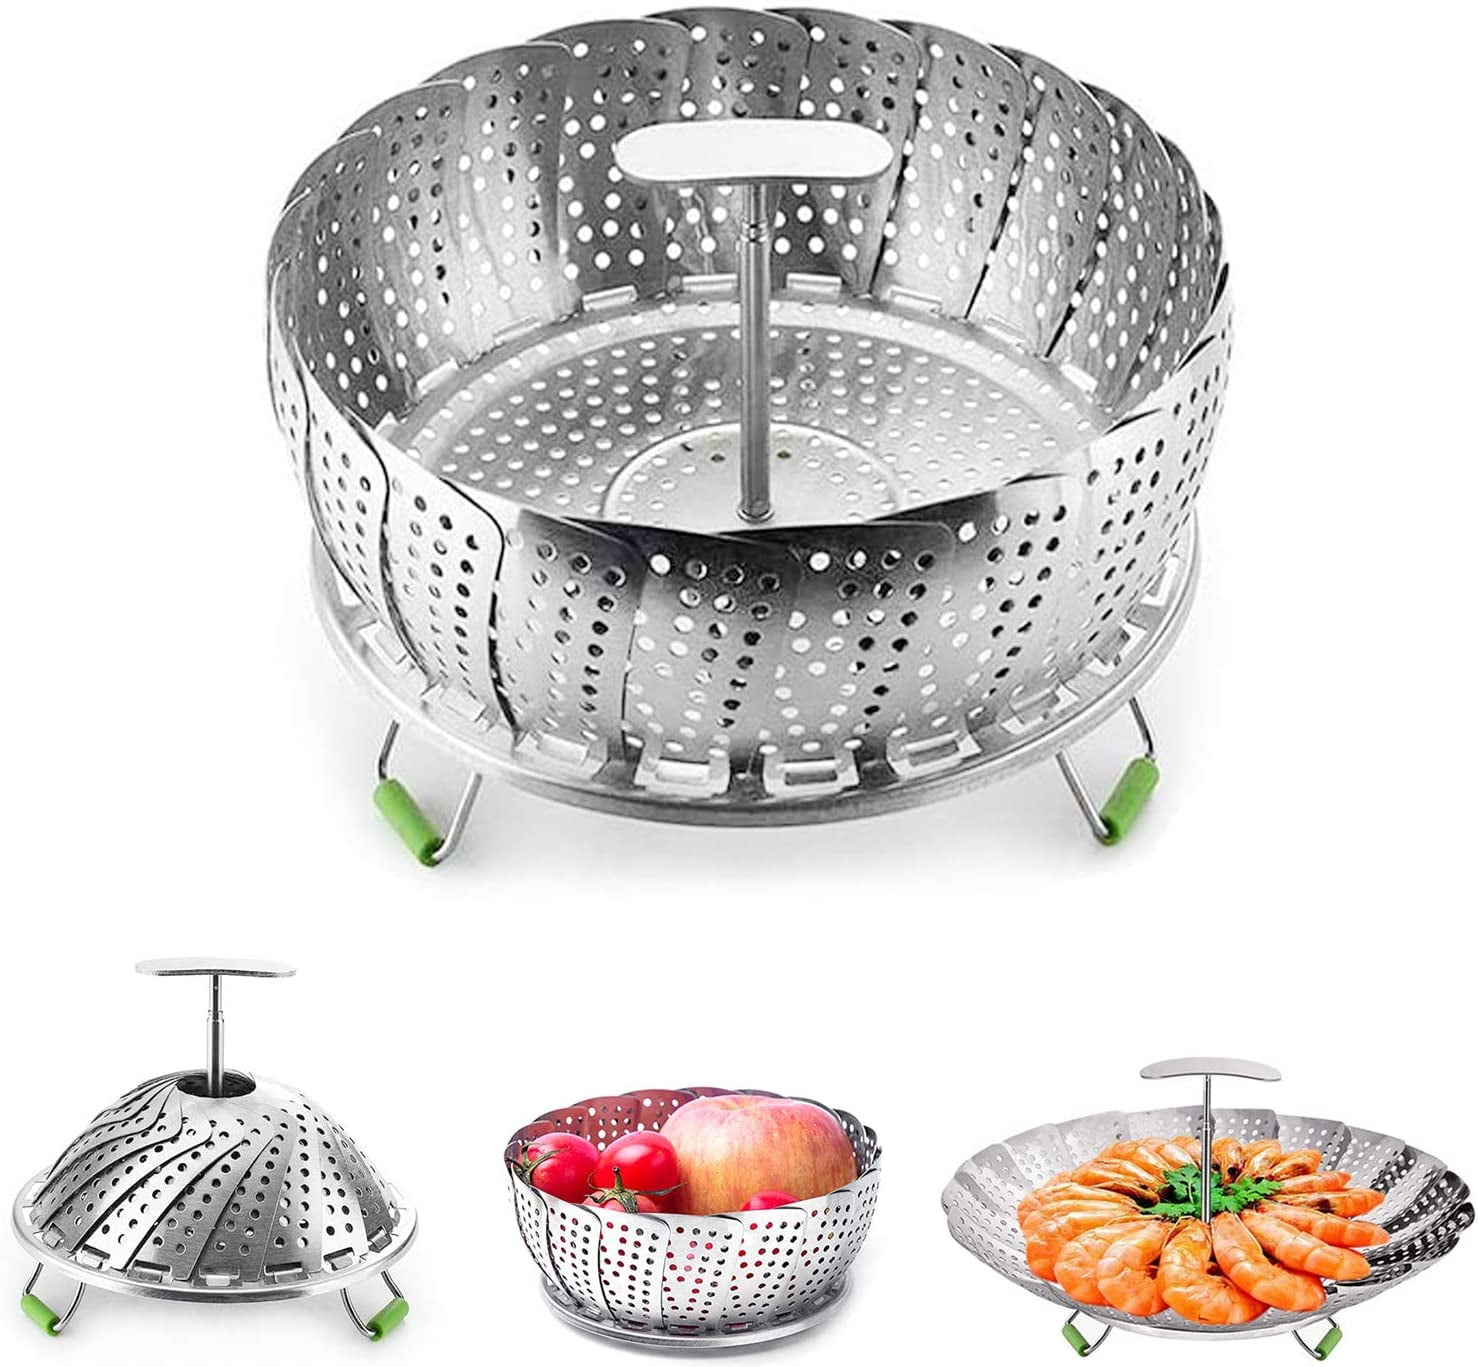  Chef Craft Classic Steamer Basket, 6 inch Diameter 9.5 inch  Expanded, Stainless Steel: Vegetable Steamer: Home & Kitchen